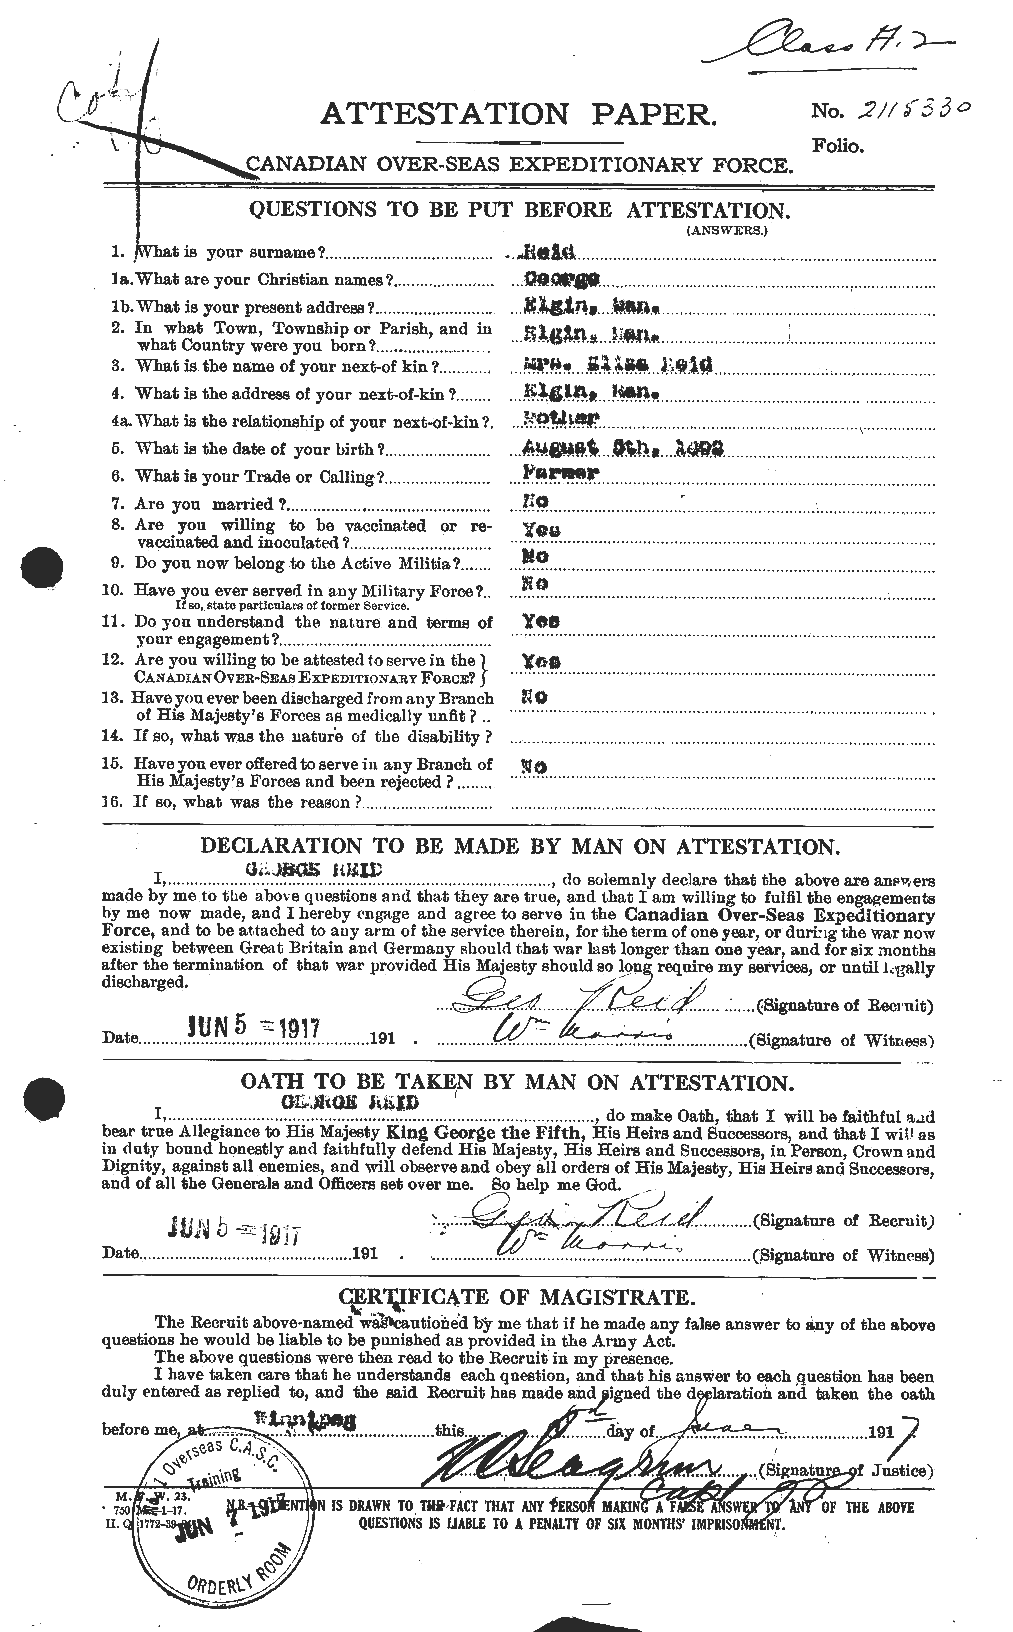 Personnel Records of the First World War - CEF 596272a